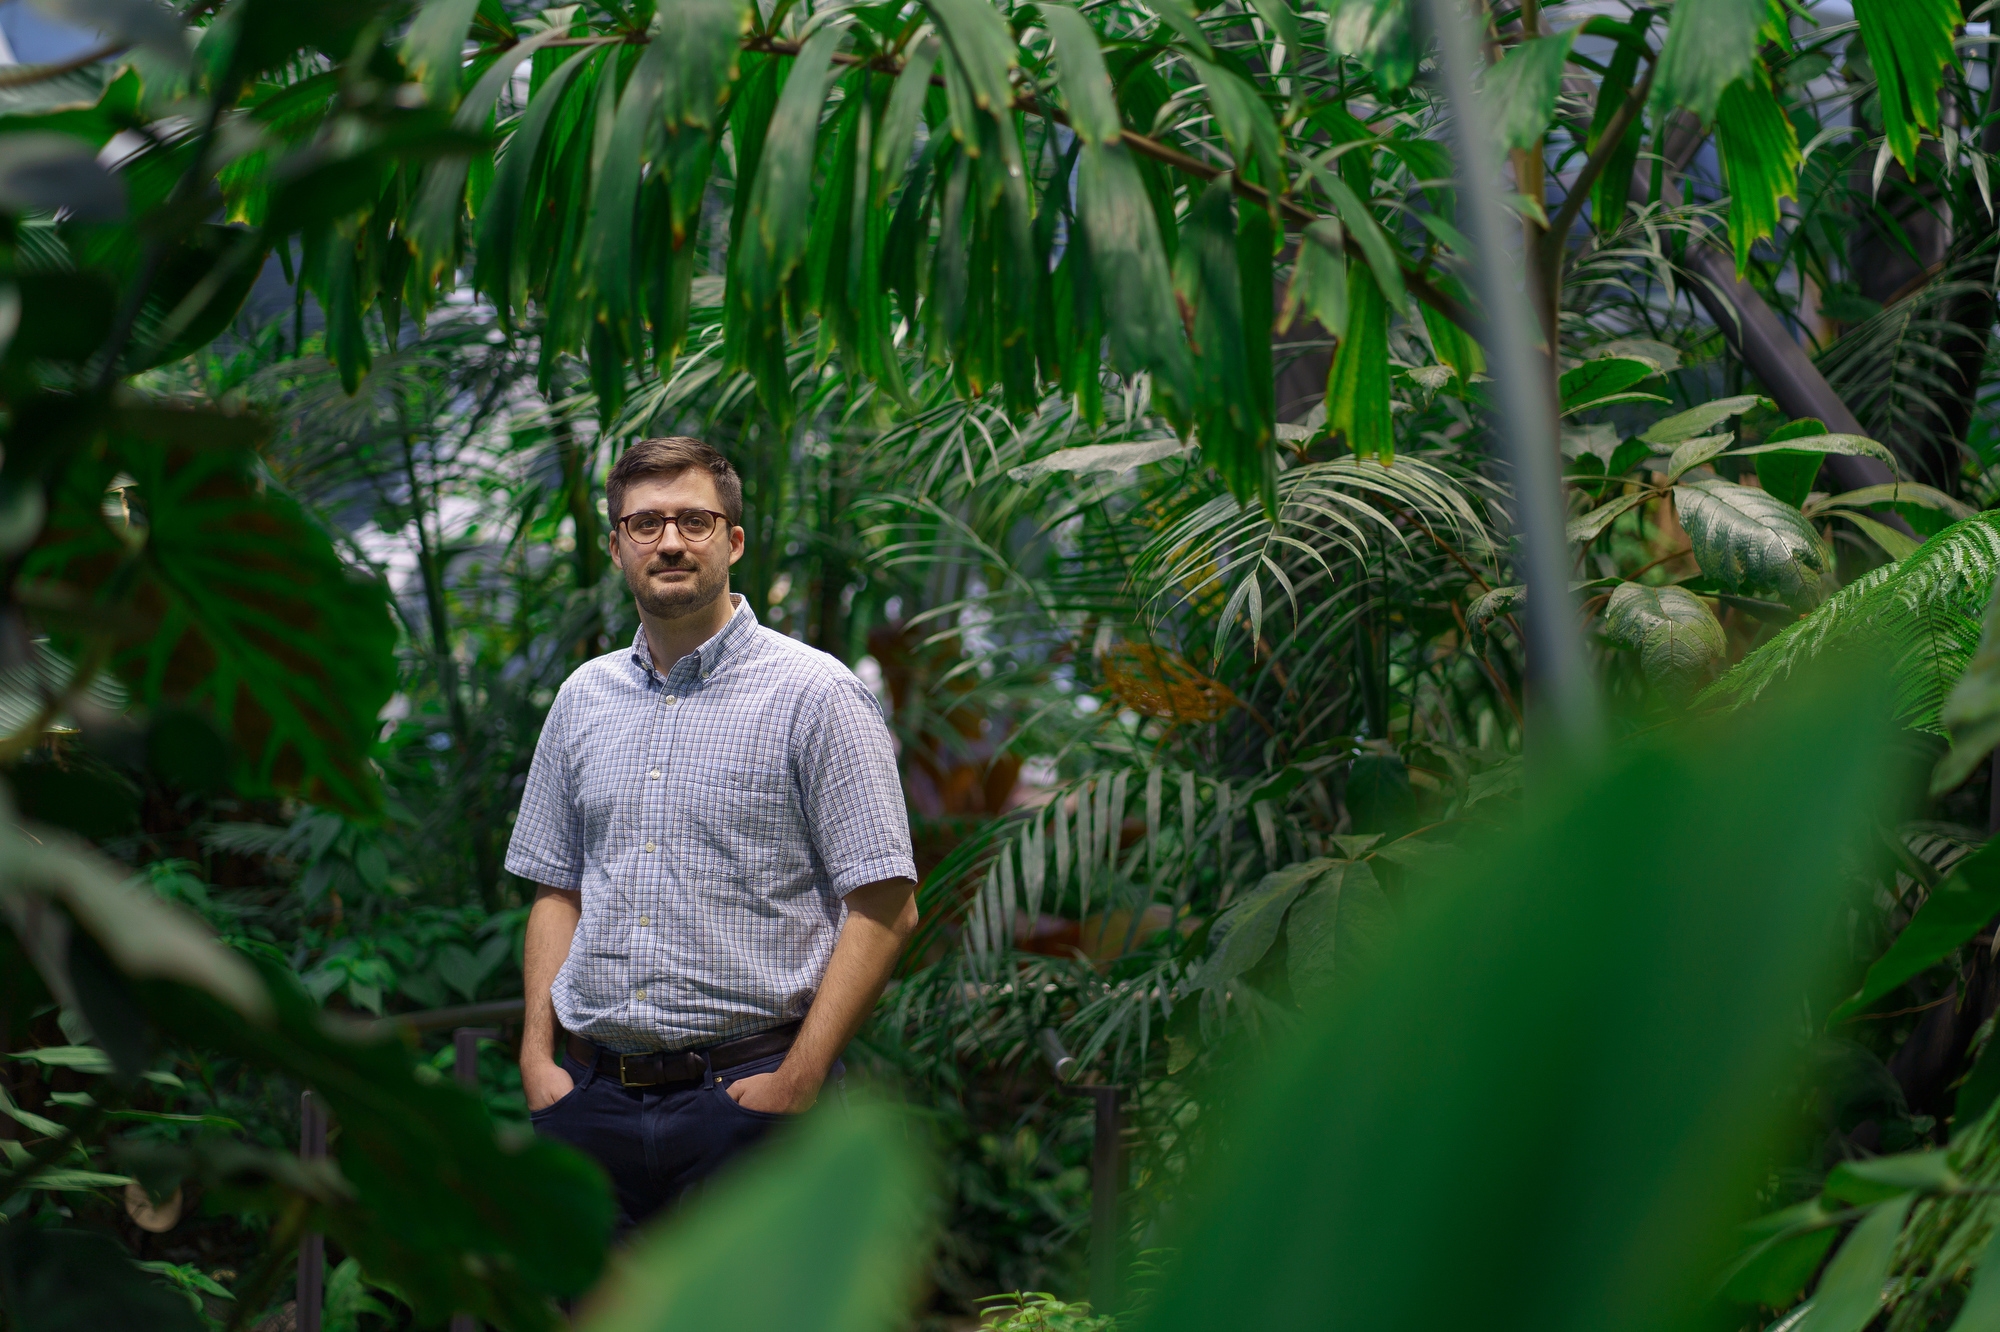 An Amazonian, Michael Tapich, poses in the Amazon Spheres